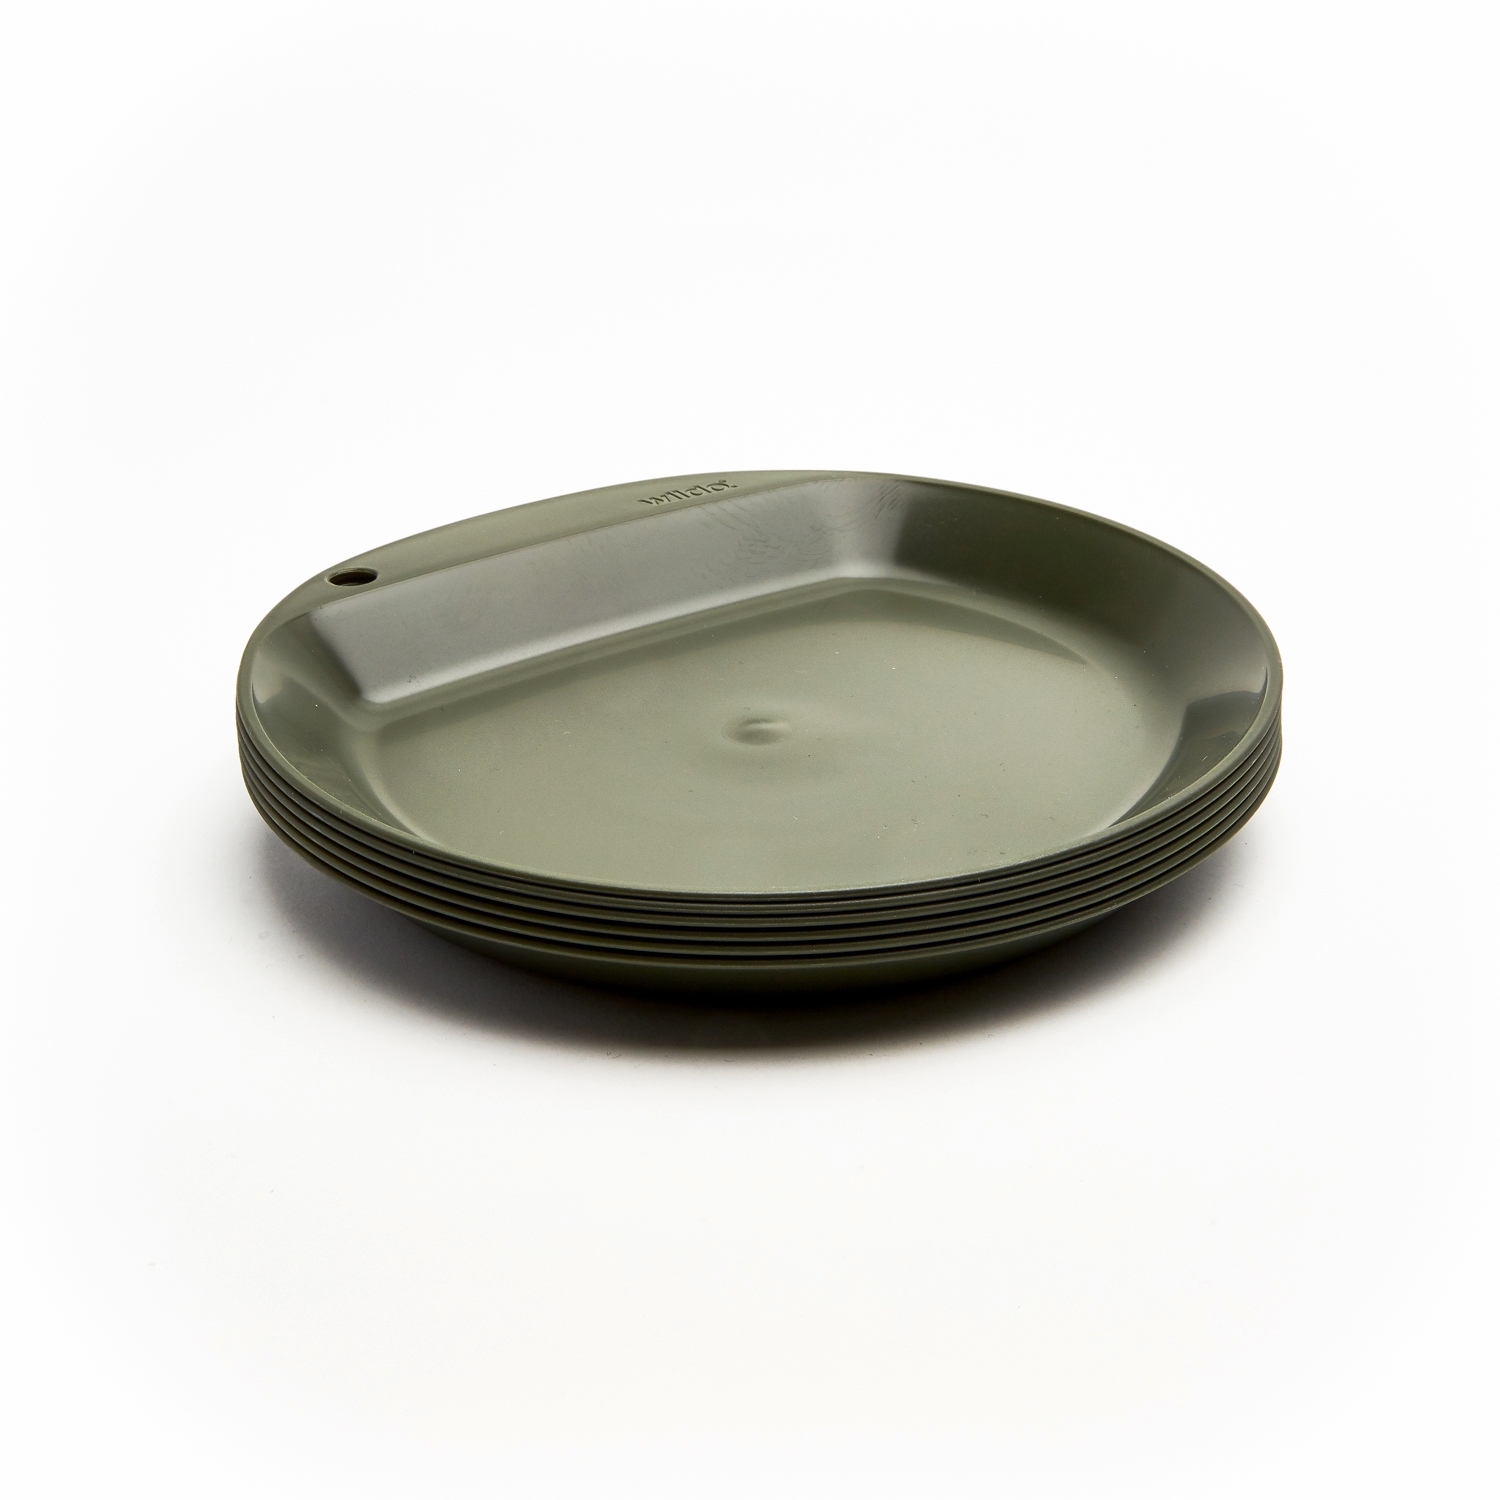 Image of Wildo Camper Plate Flat - 6 pieces - olive